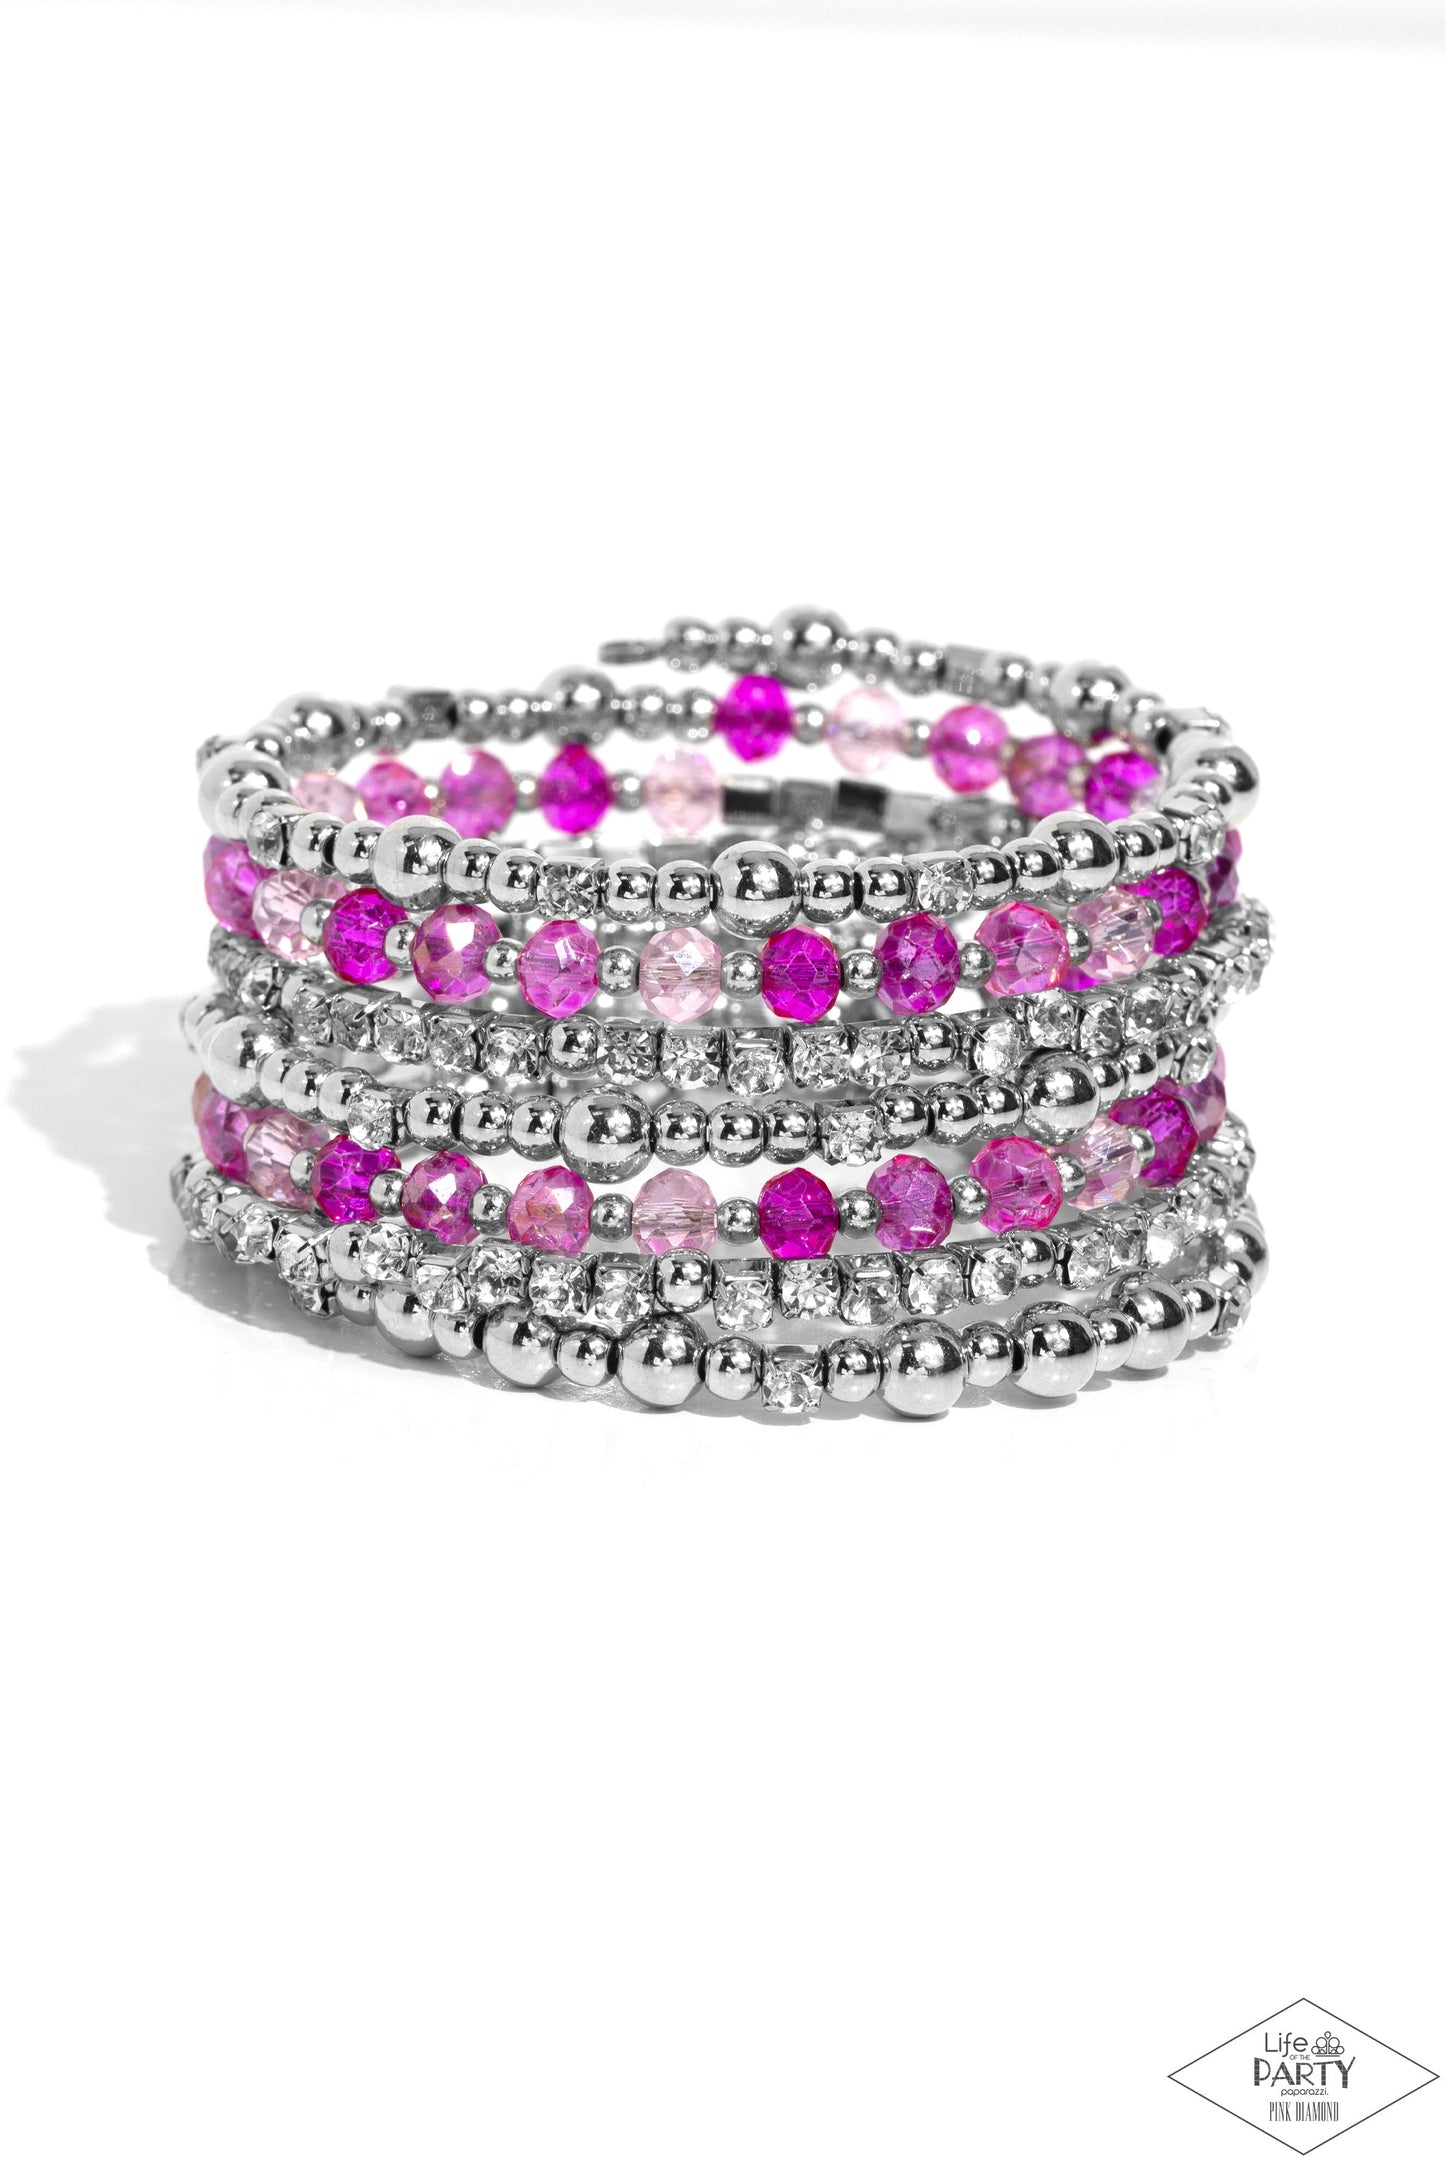 ICE Knowing You - Pink Infinity Wrap Bracelet - Paparazzi Accessories - An icy collection of silver beads, cubes, opaque crystals in various pink shades, and glassy white rhinestones are threaded along a coiled wire, creating a blinding infinity wrap style bracelet around the wrist. Sold as one individual bracelet.